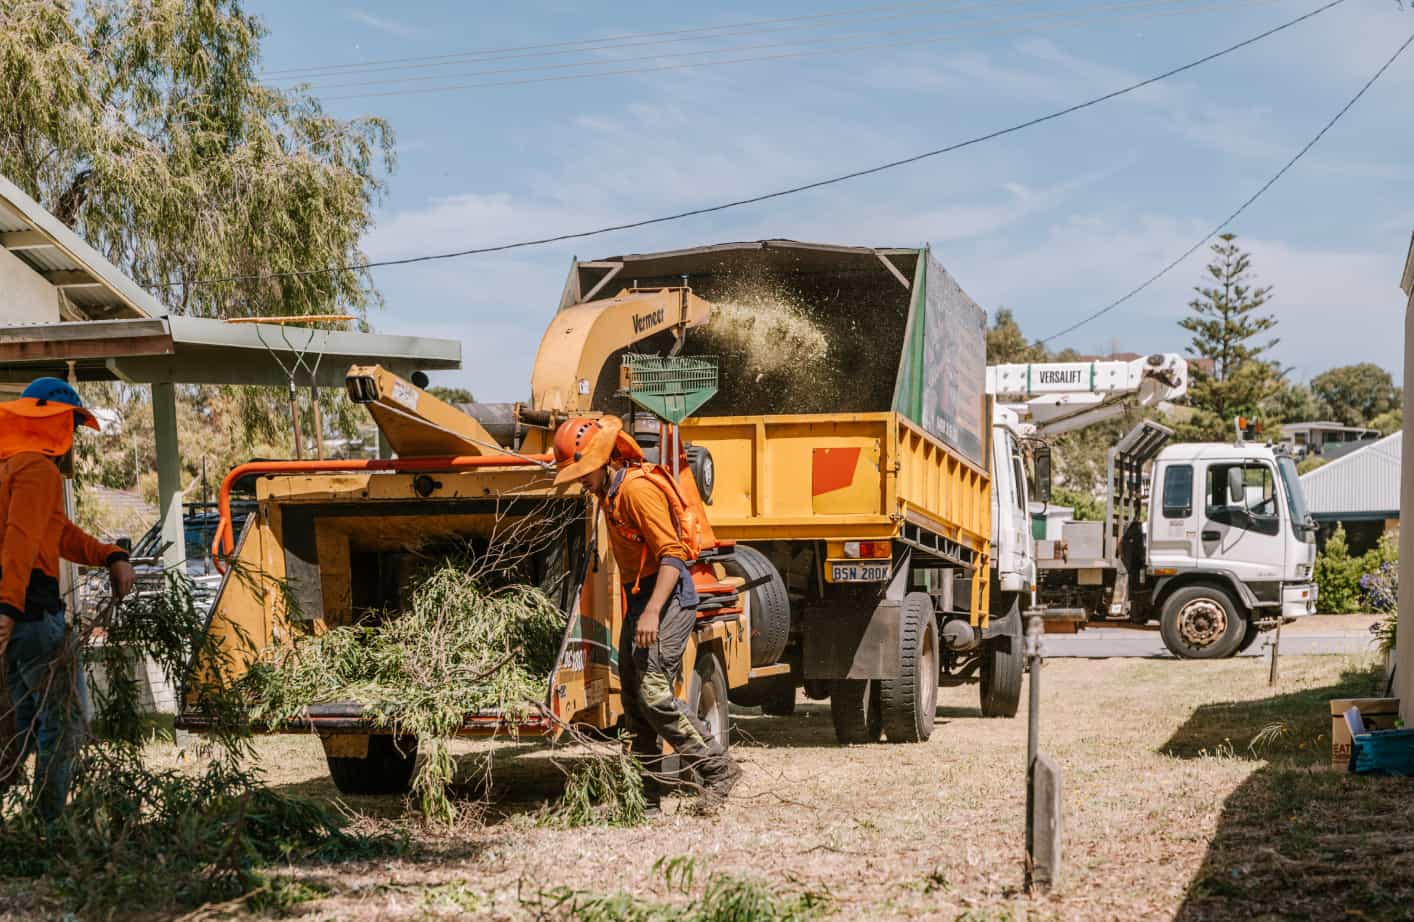 Commercial tree service